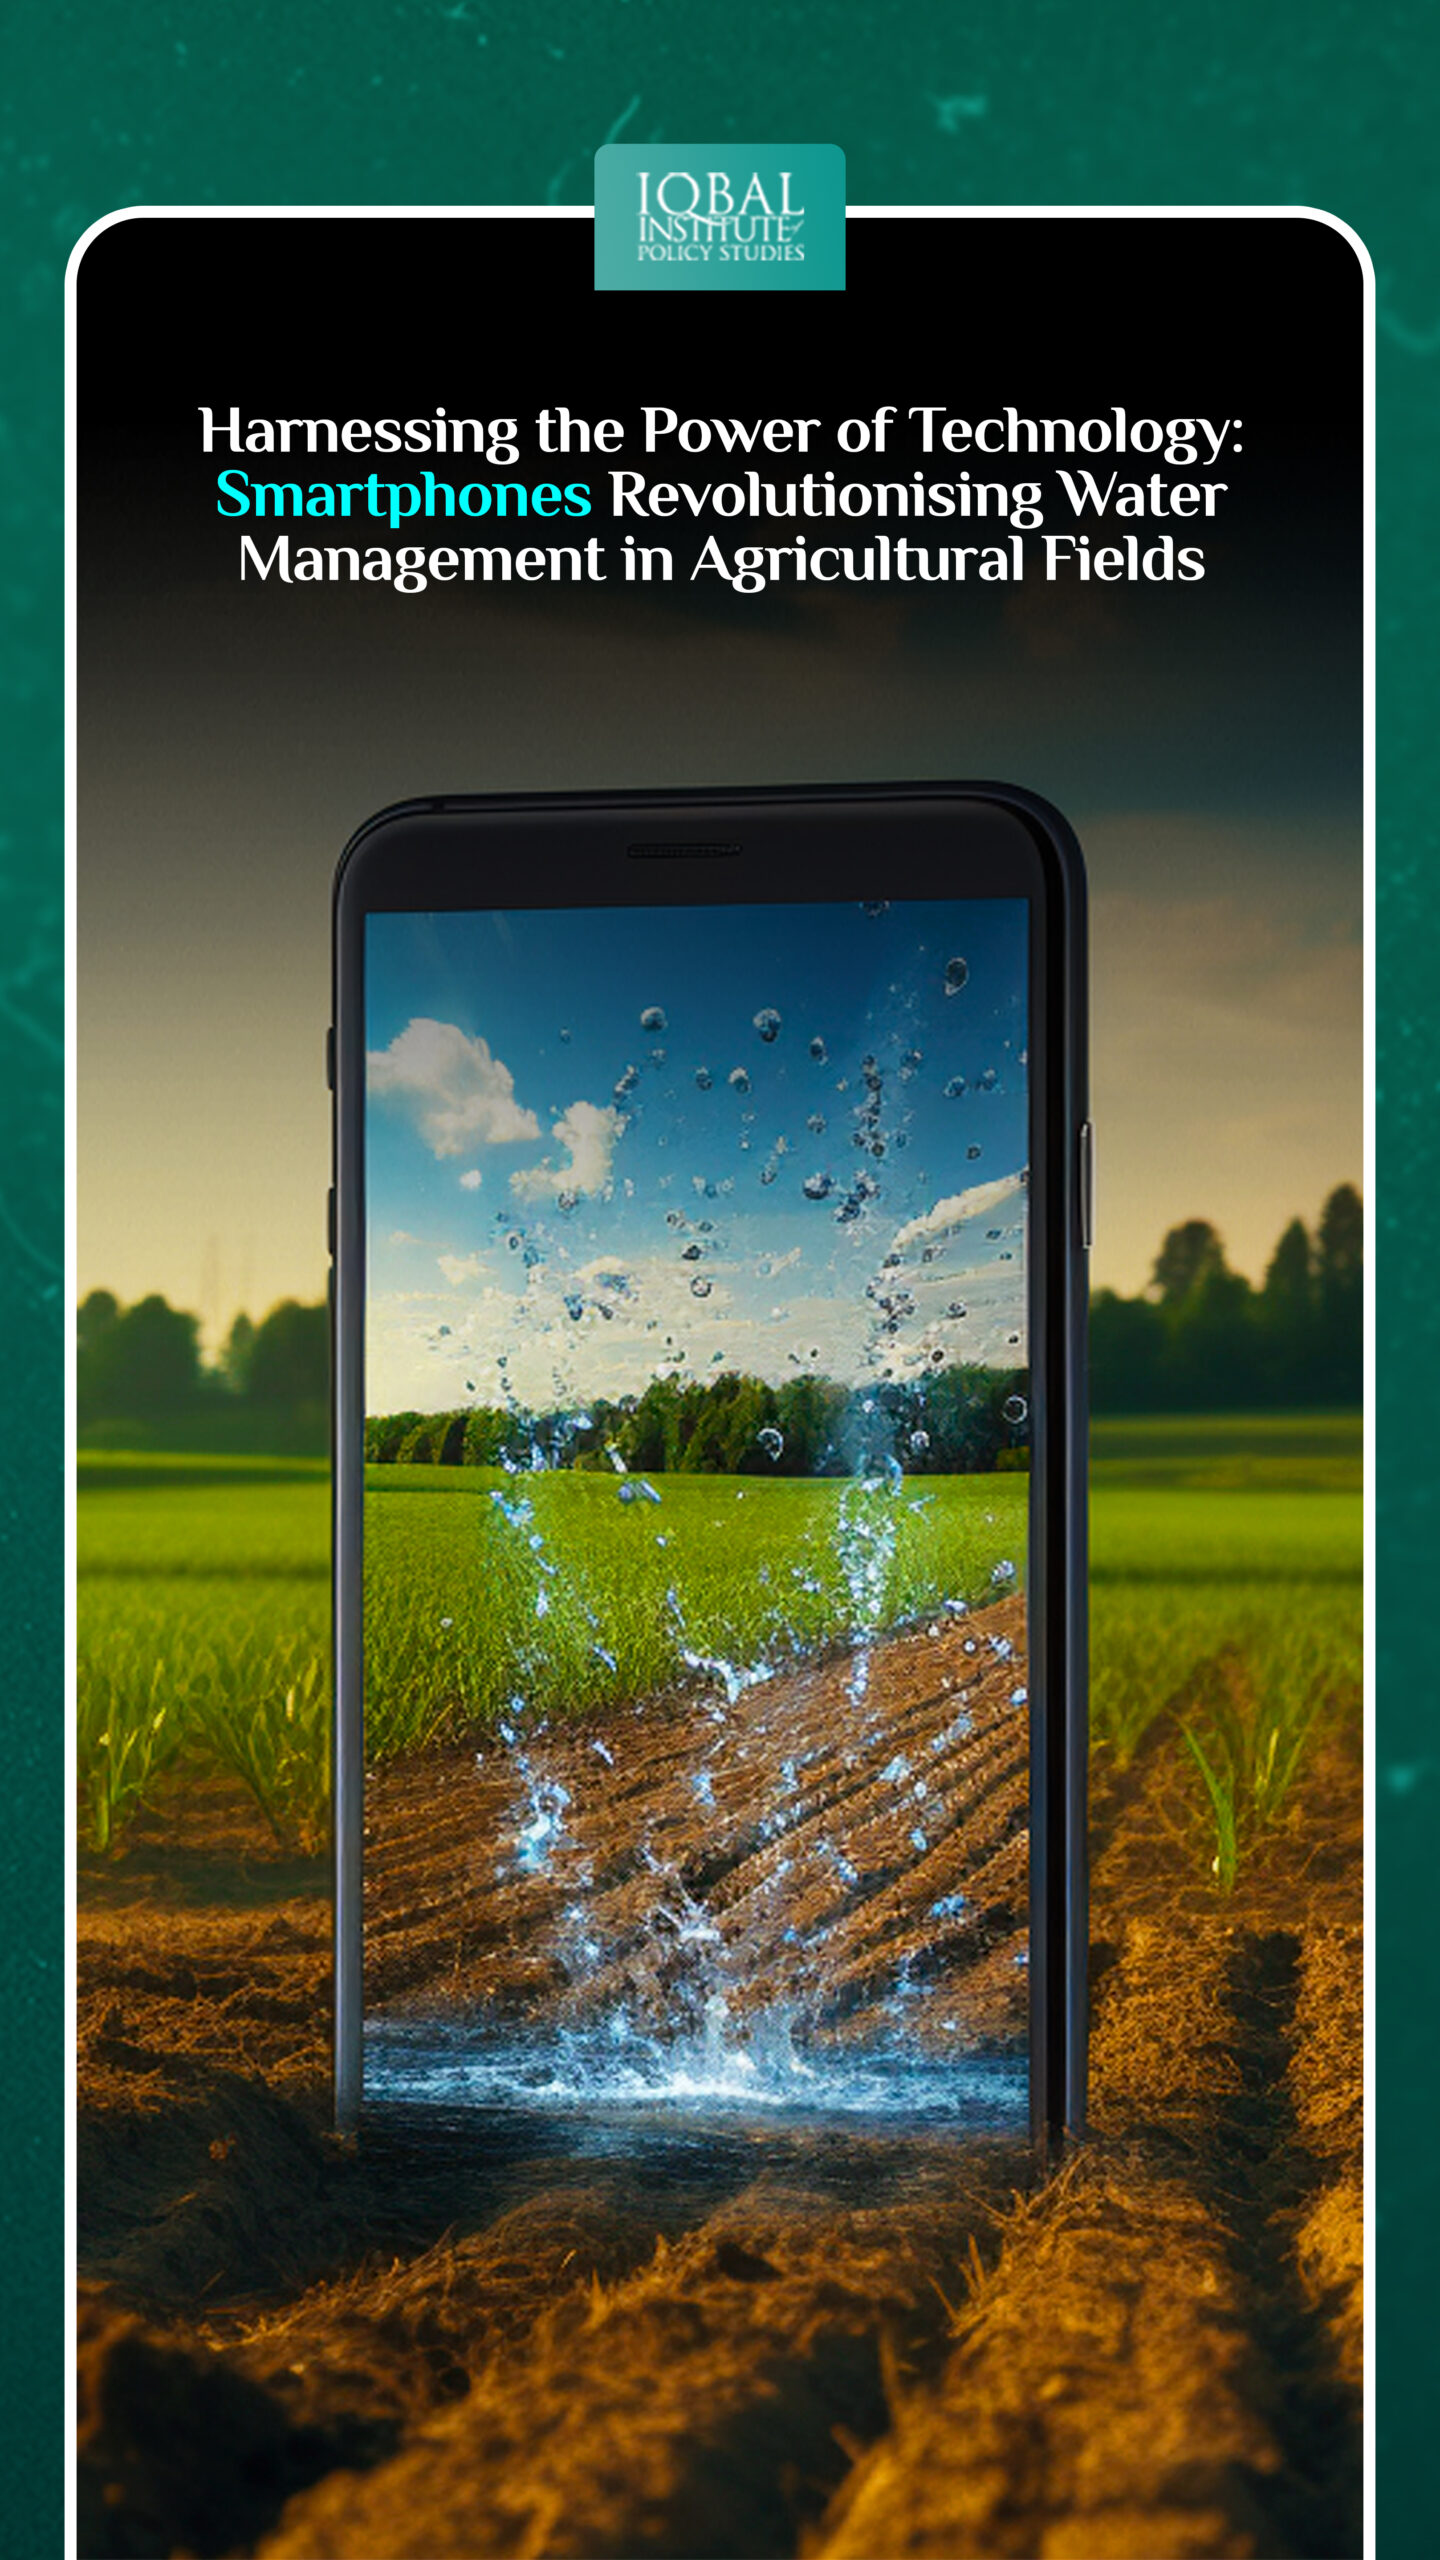 Harnessing the Power of Technology: Smartphones Revolutionising Water Management in Agricultural Fields